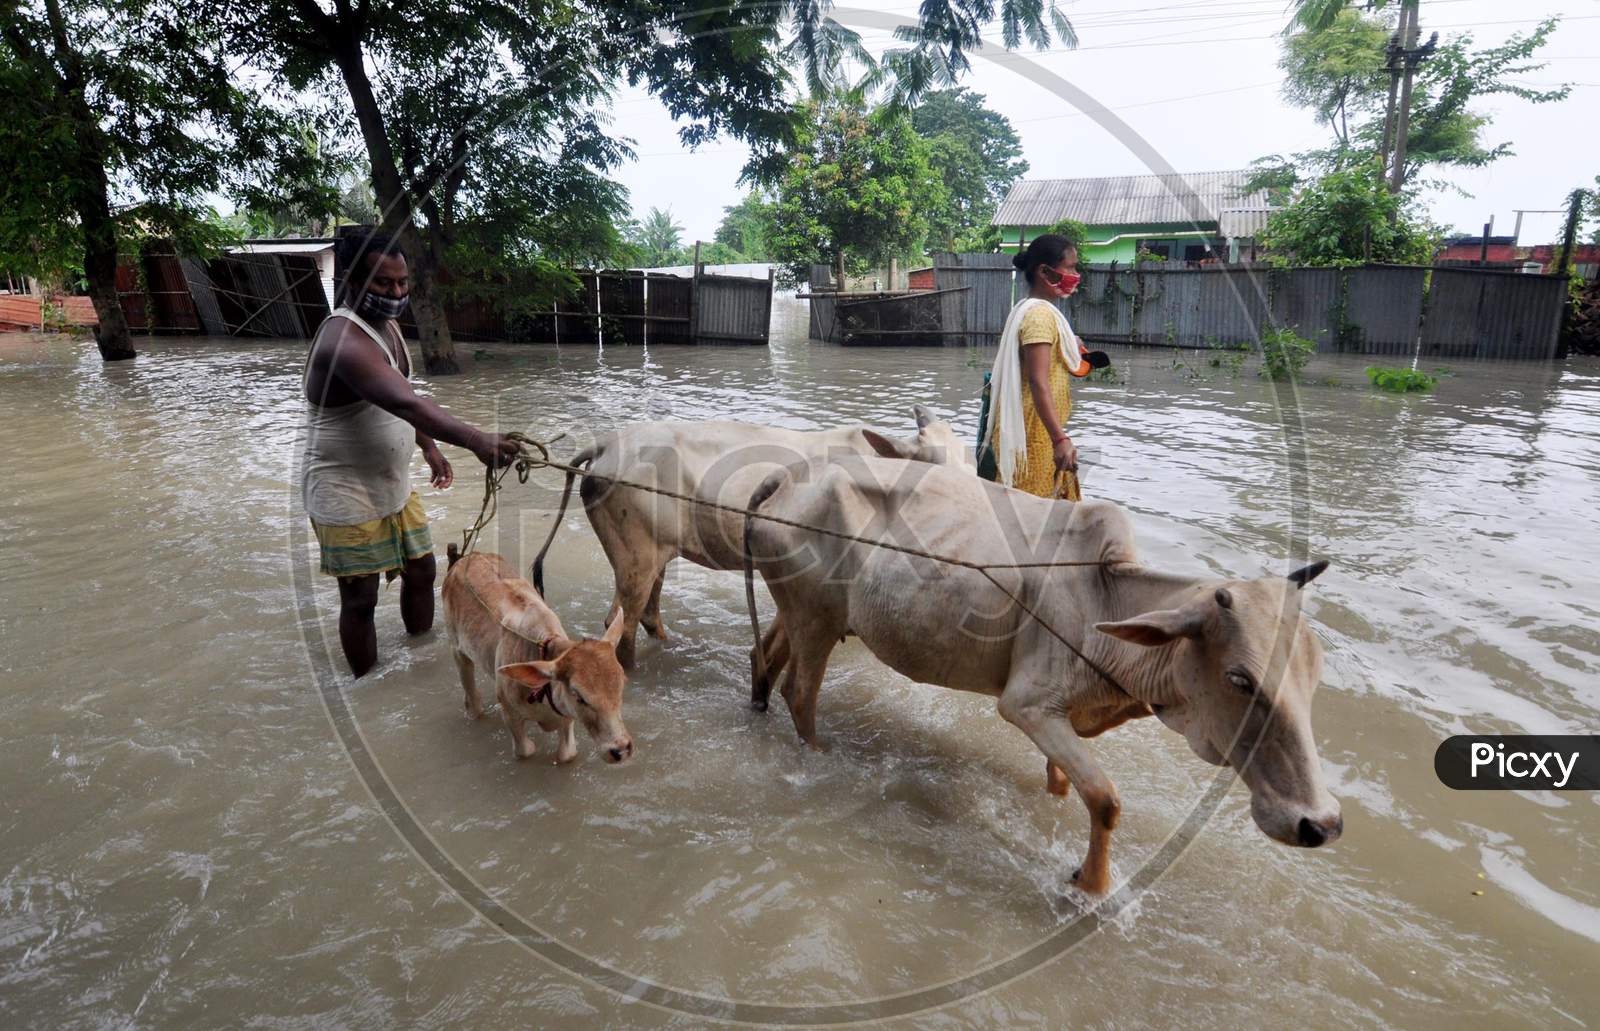 Villagers move their cattle to a safer place from the flood-affected regions in Hatisela district in Kamrup, Assam on July 14, 2020